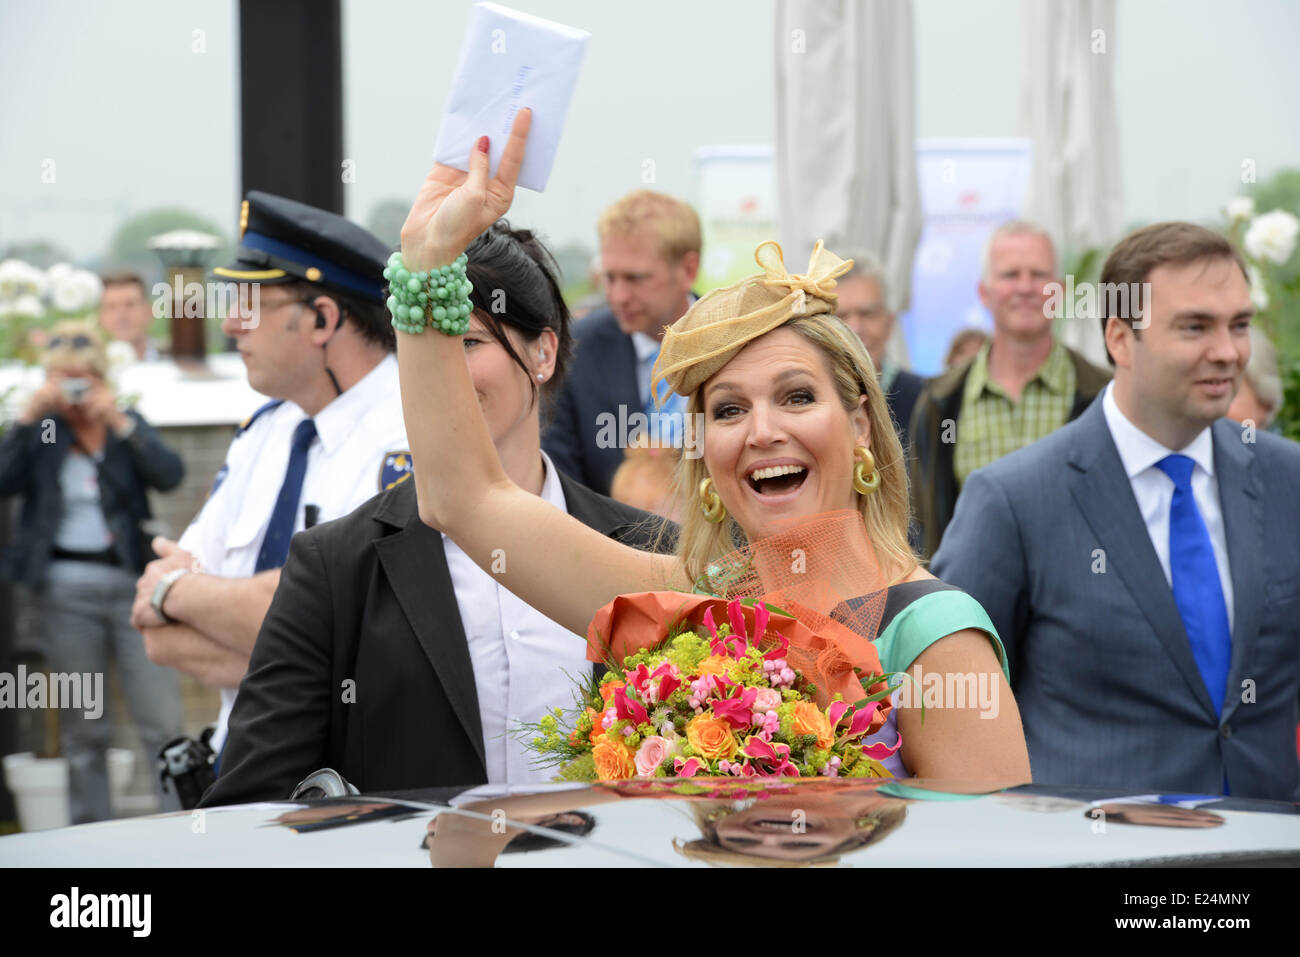 Queen Maxima of The Netherlands at the opening of Maximapark at Leidsche Rijn in Utrecht. The park is a green area of 300 ha with a park restaurant, a forest playground and sculptures. Available for publication in Utrecht, The Netherlands - 05.07.2013  Where: UK, n-h, United States When: 05 Jul 2013 Stock Photo